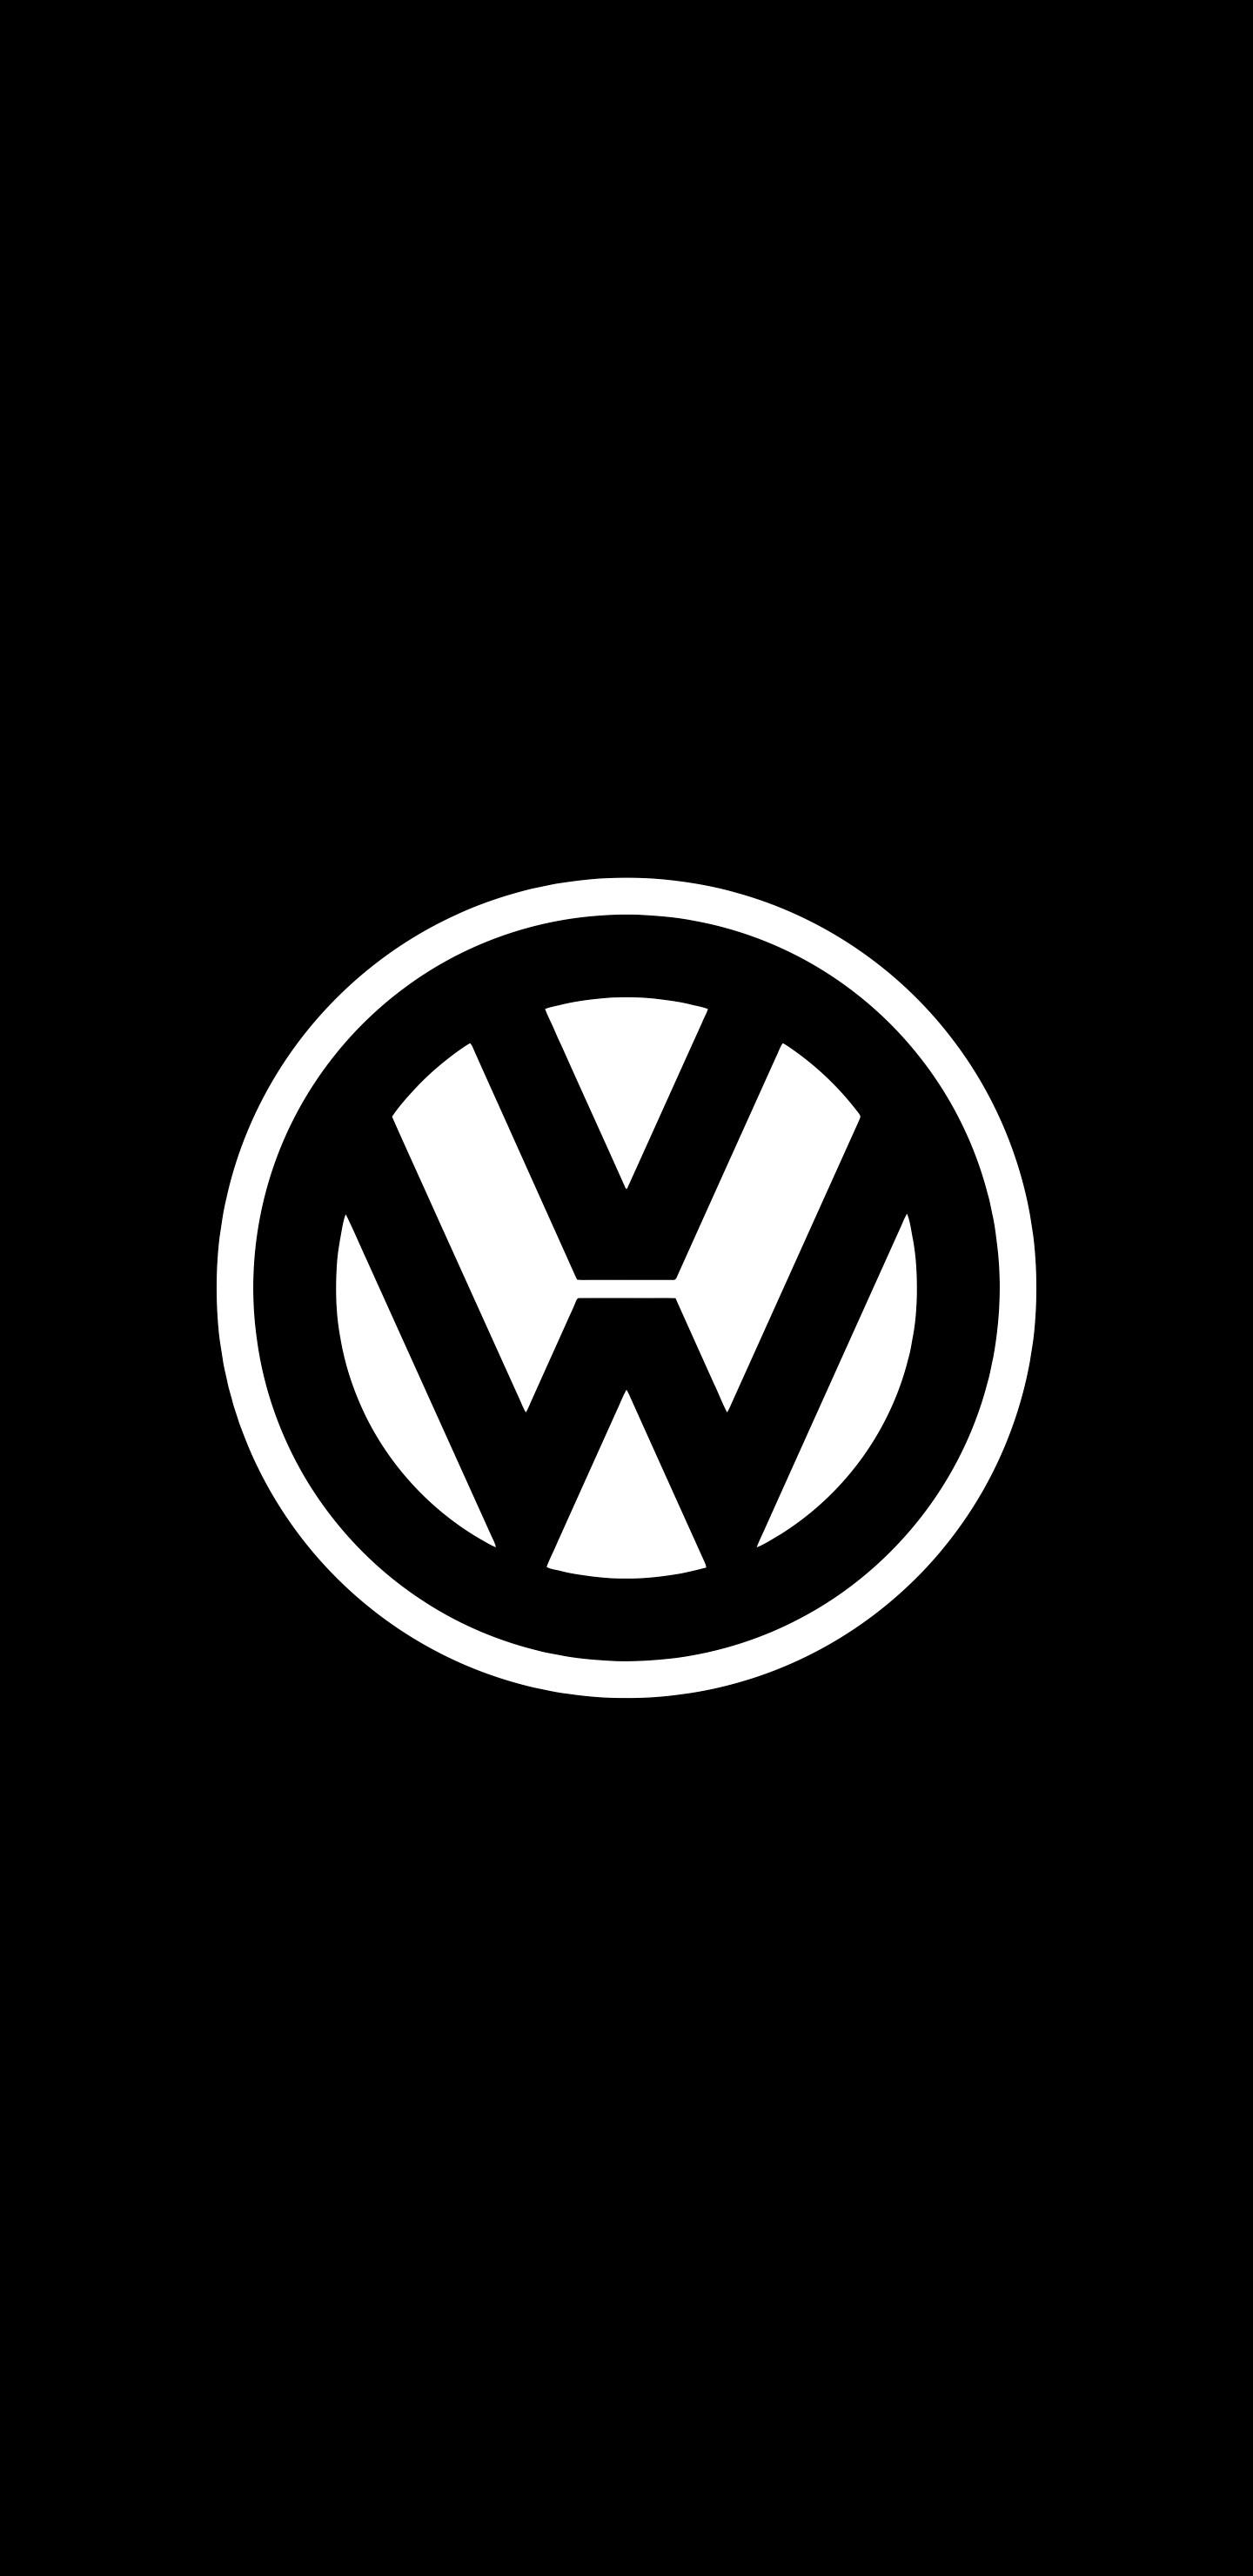 Vw Iphone Wallpapers Top Free Vw Iphone Backgrounds Wallpaperaccess